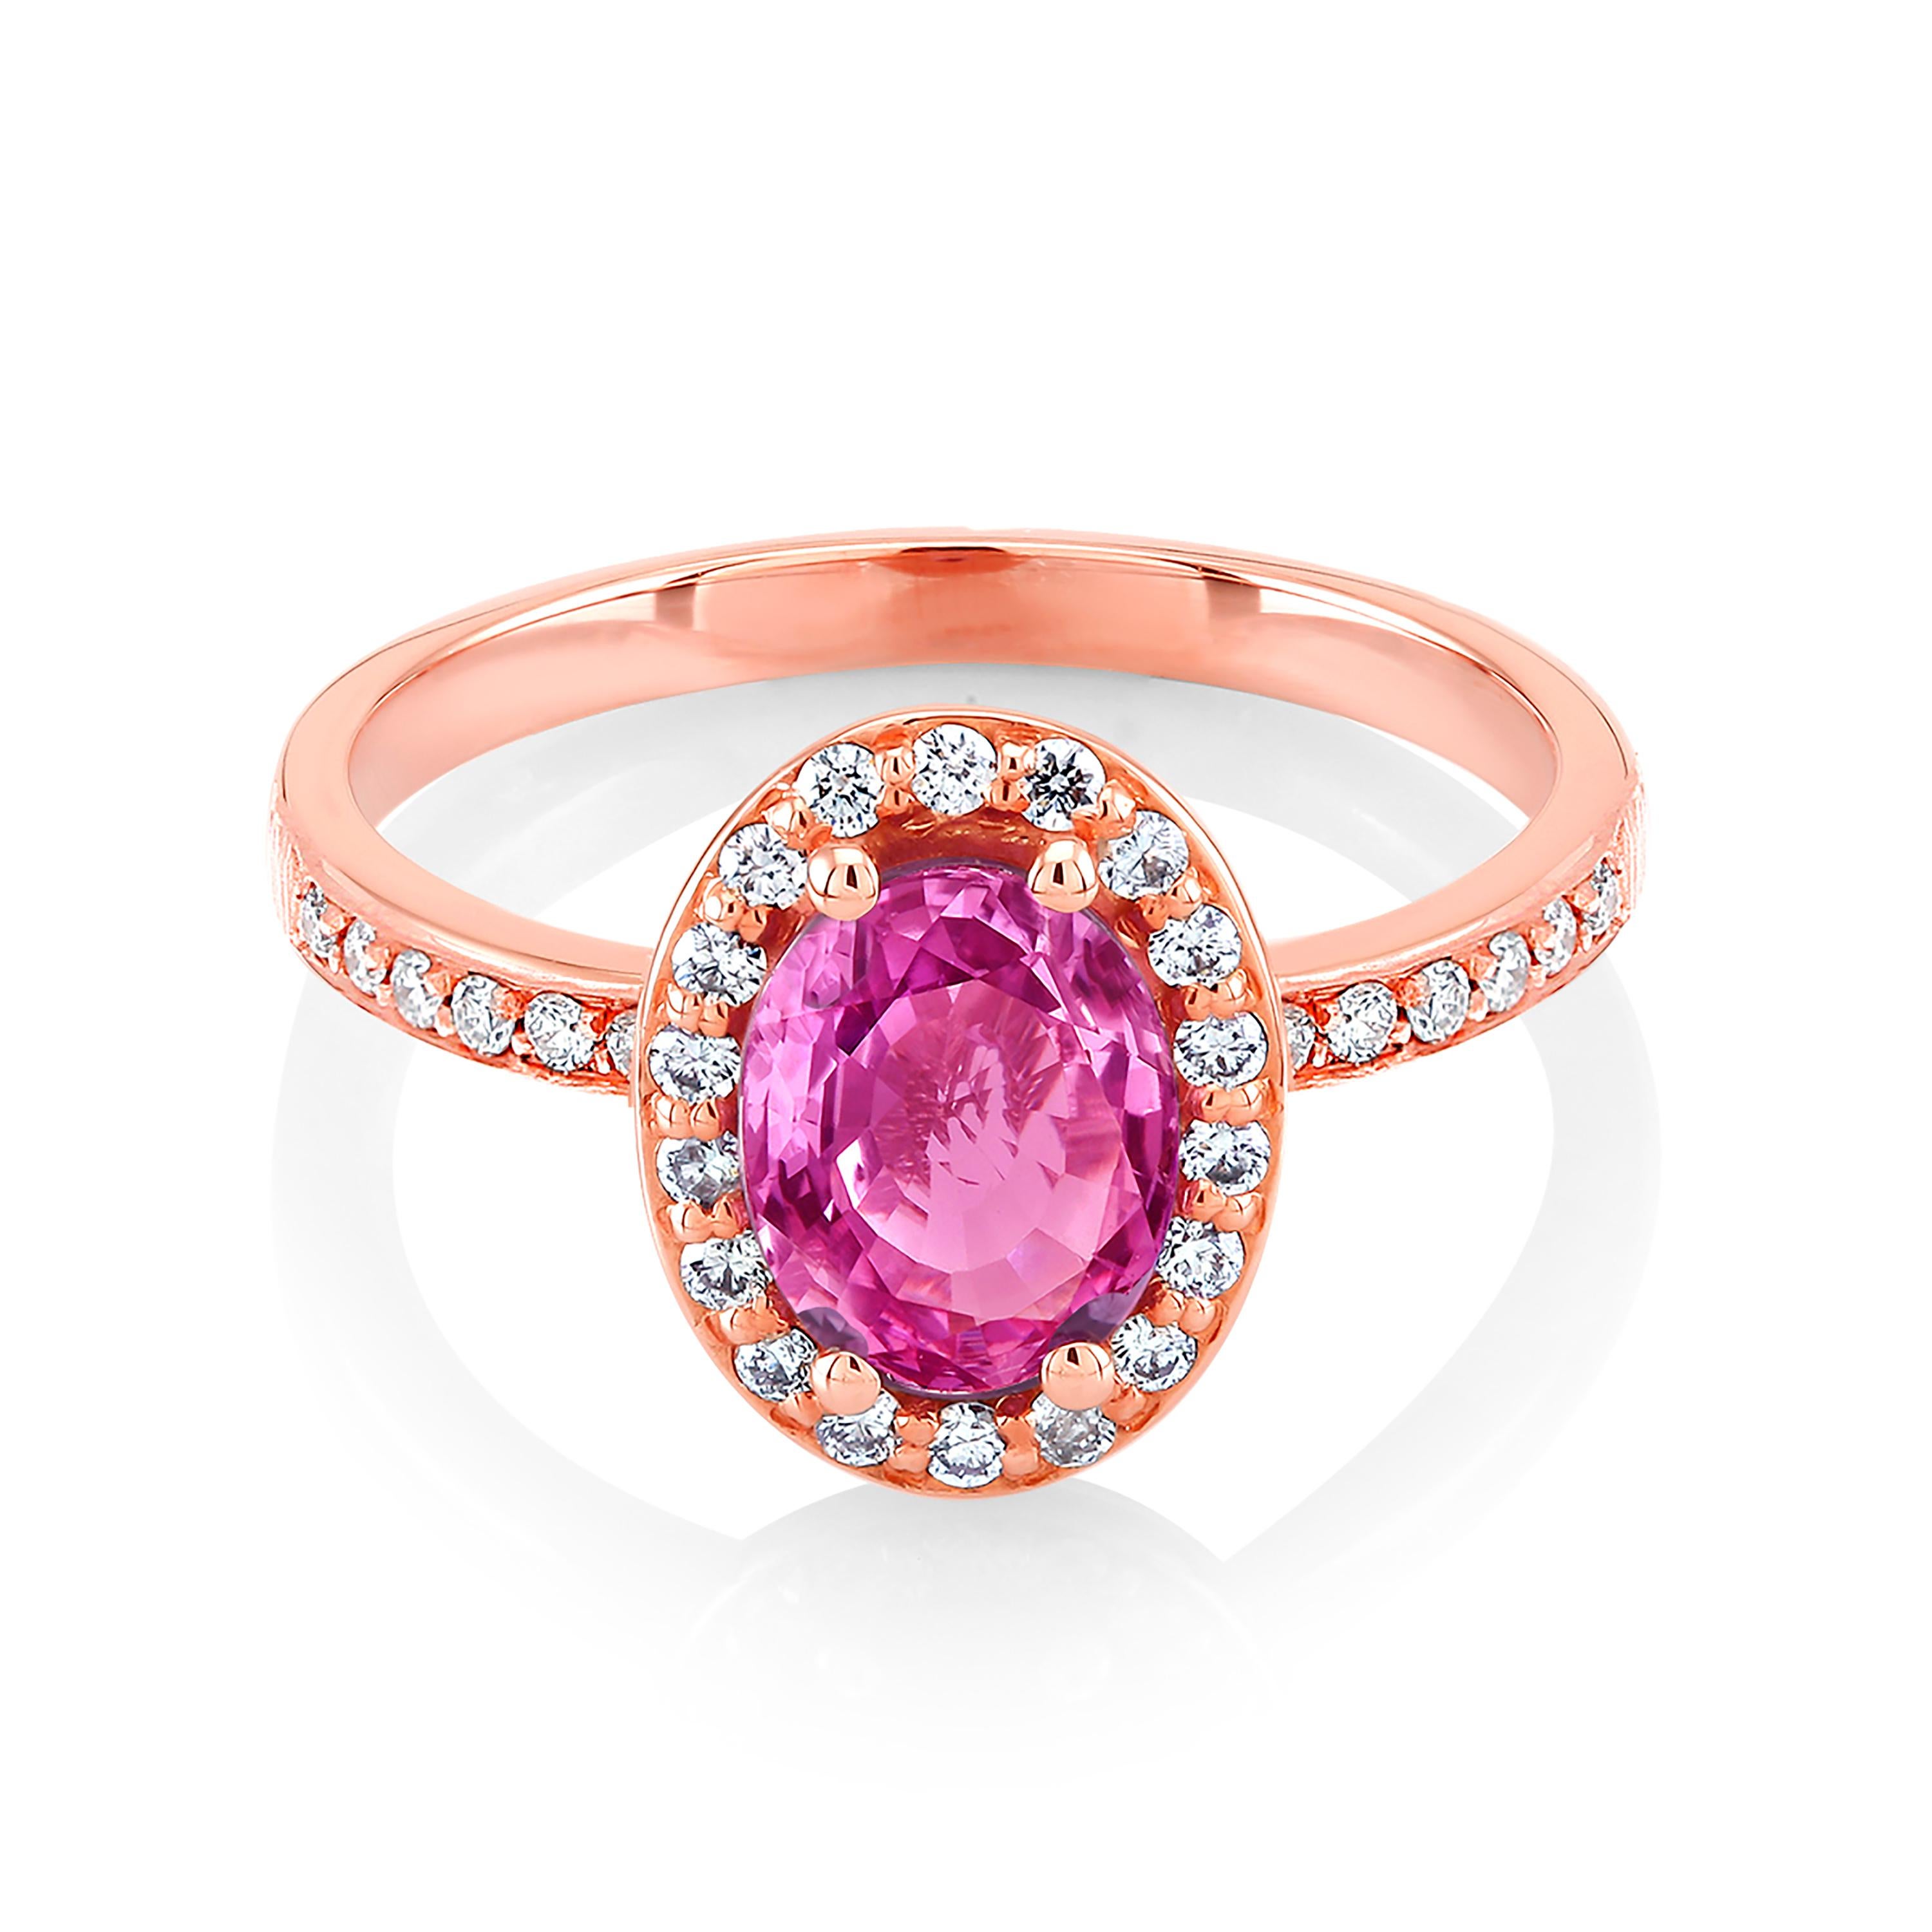 Contemporary Oval Pink Sapphire and Diamond Rose Gold Cocktail Ring Weighing 1.75 Carat